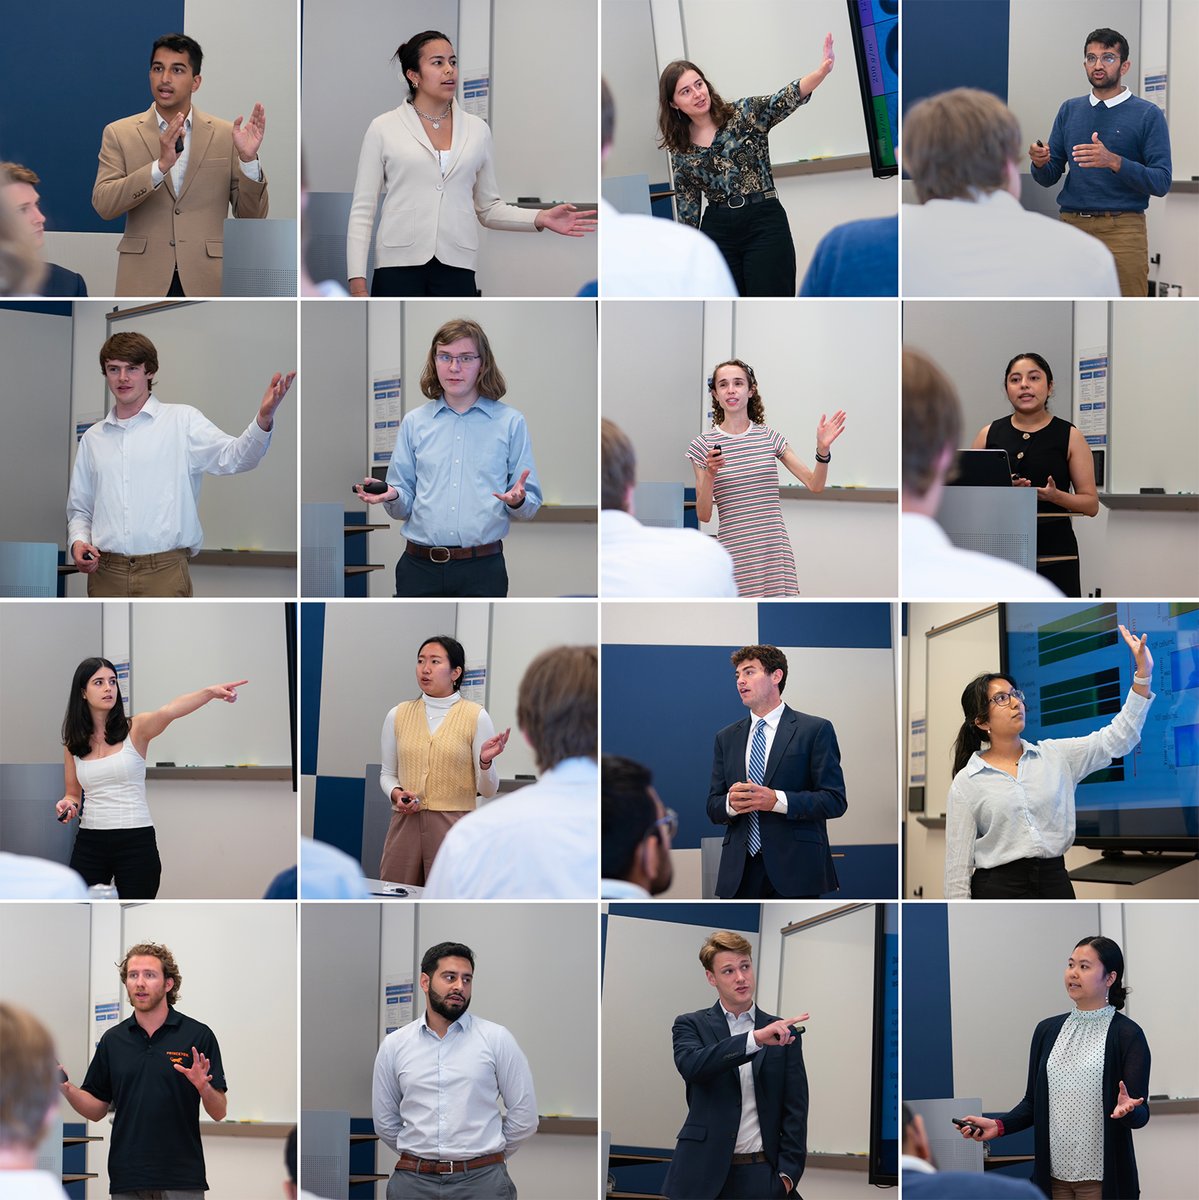 Congratulations to our students! Each of the 16 successfully presented research - ranging from microfluidics to lithium recovery to decarbonization strategies - during yesterday’s Andlinger Center certificate students’ symposium.